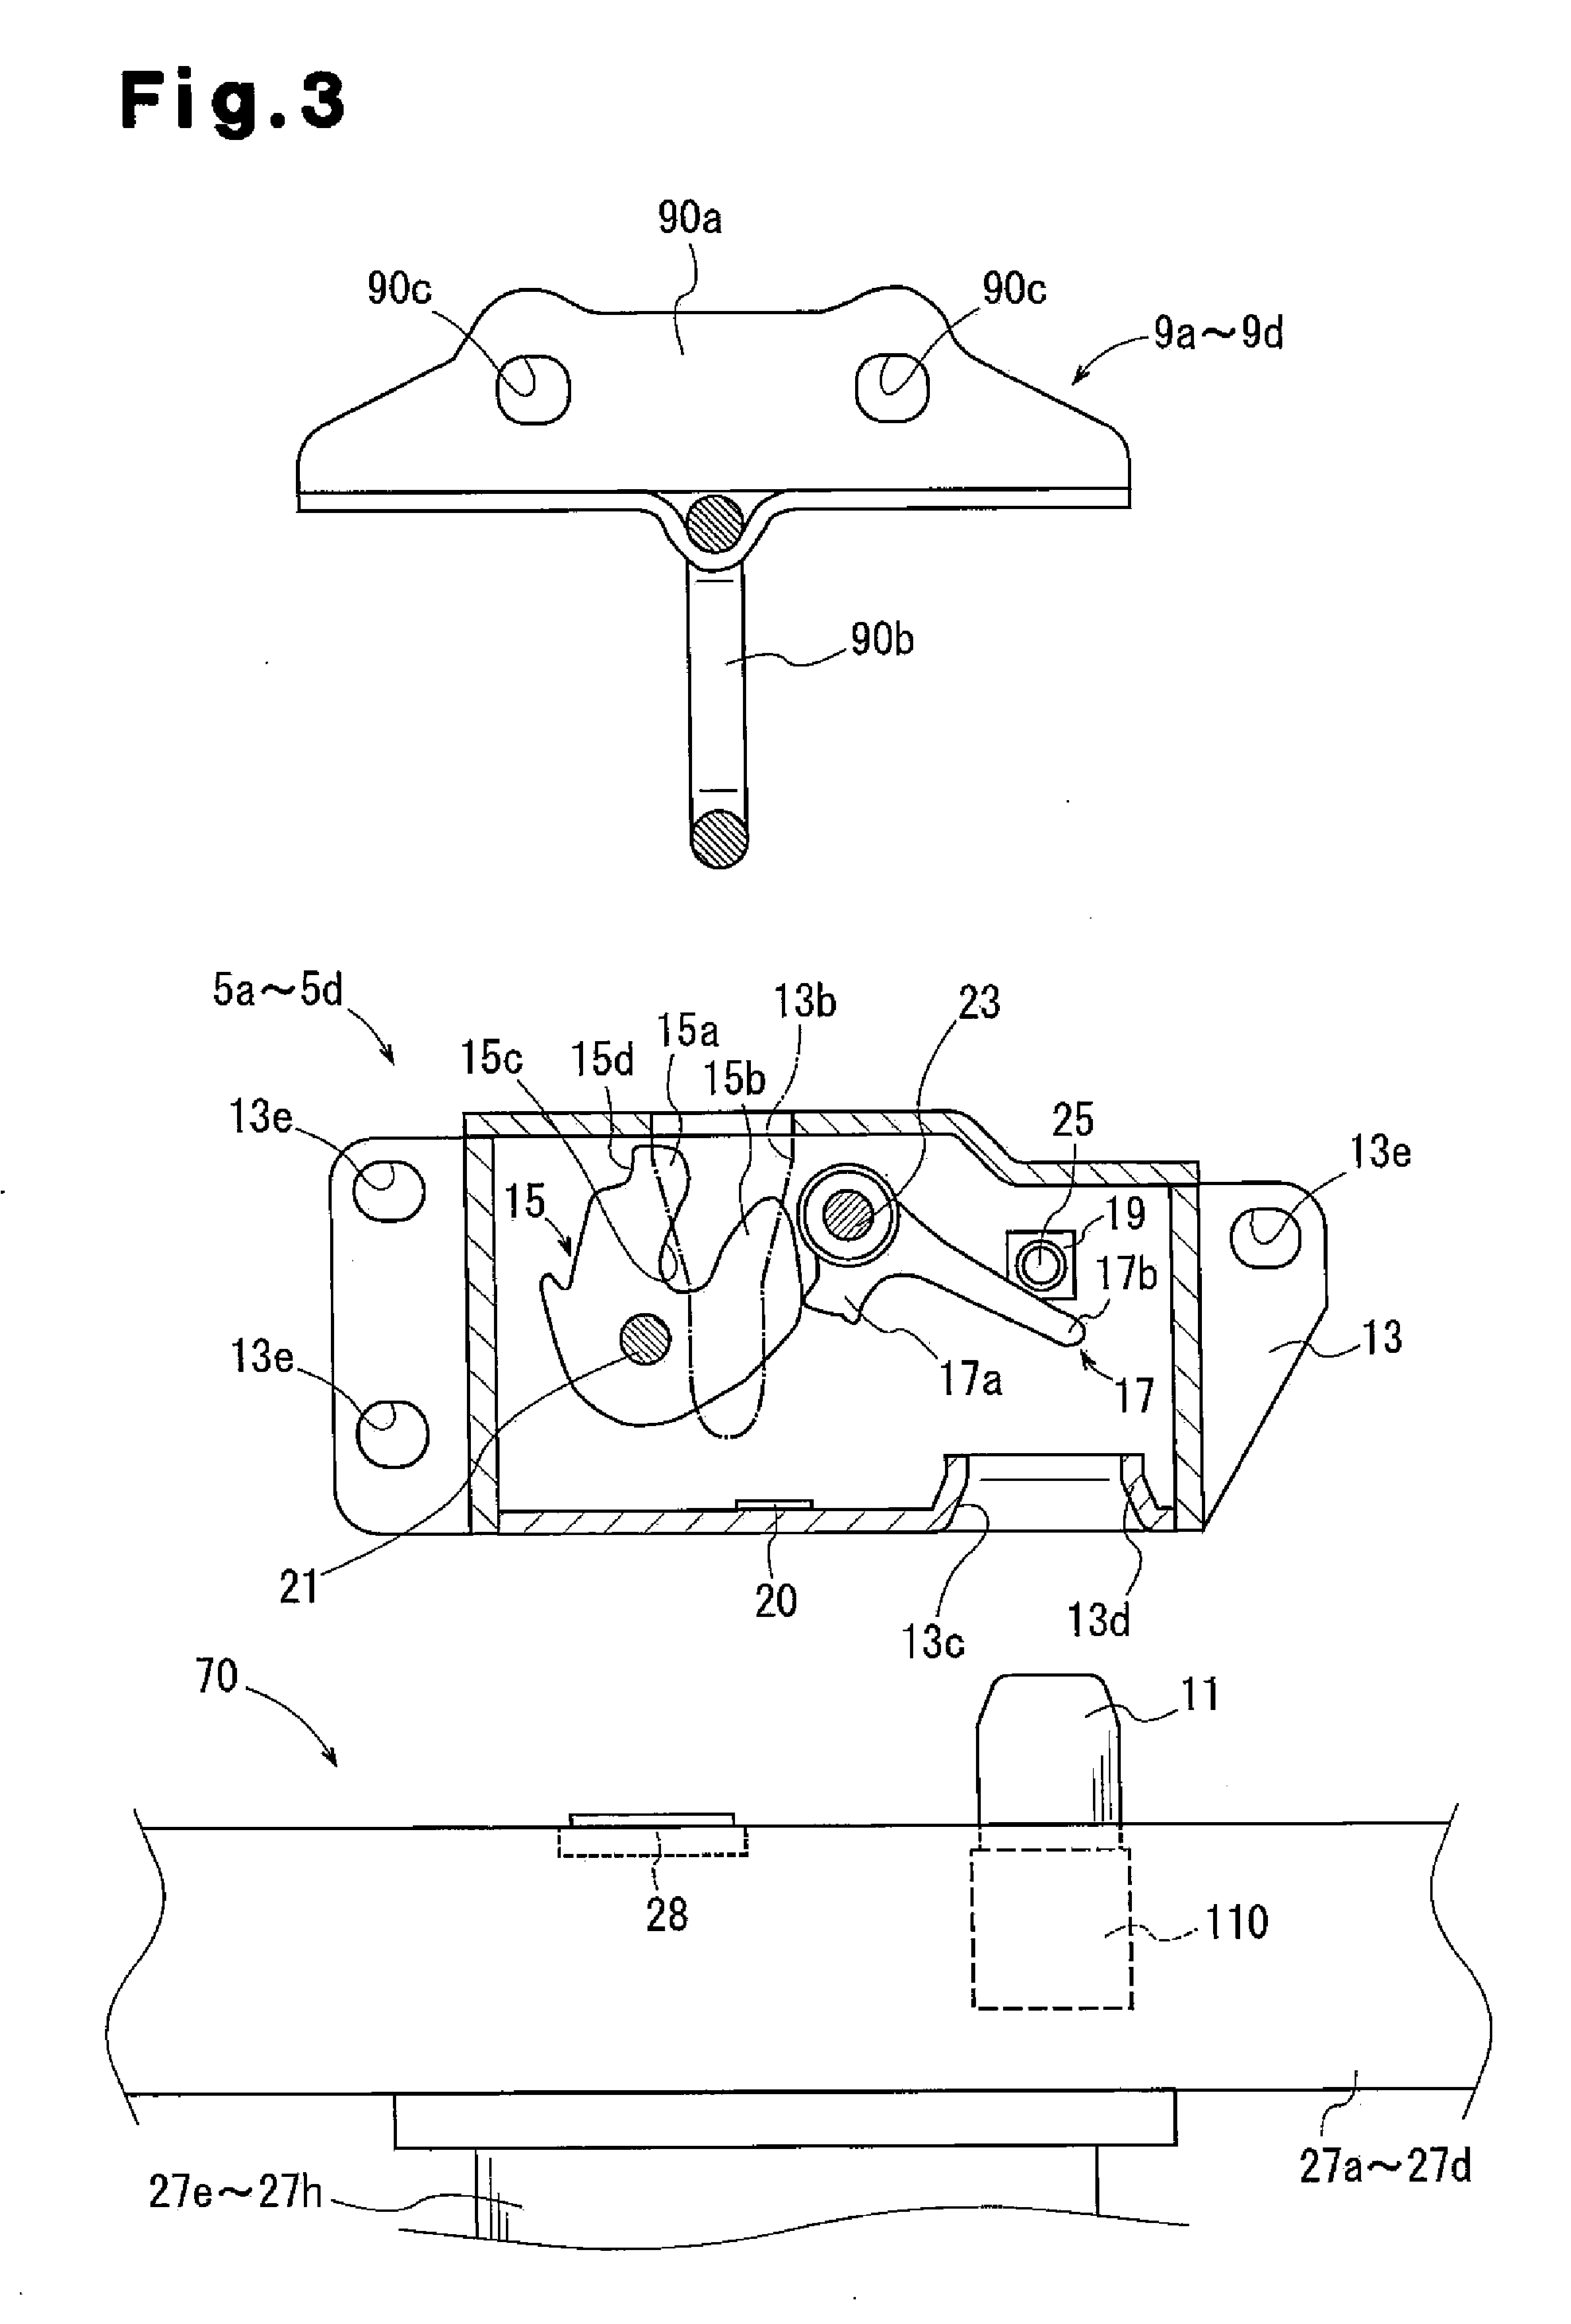 Battery mounting apparatus for electric vehicle, battery unit transfer apparatus for electric vehicle, and method for mounting battery unit